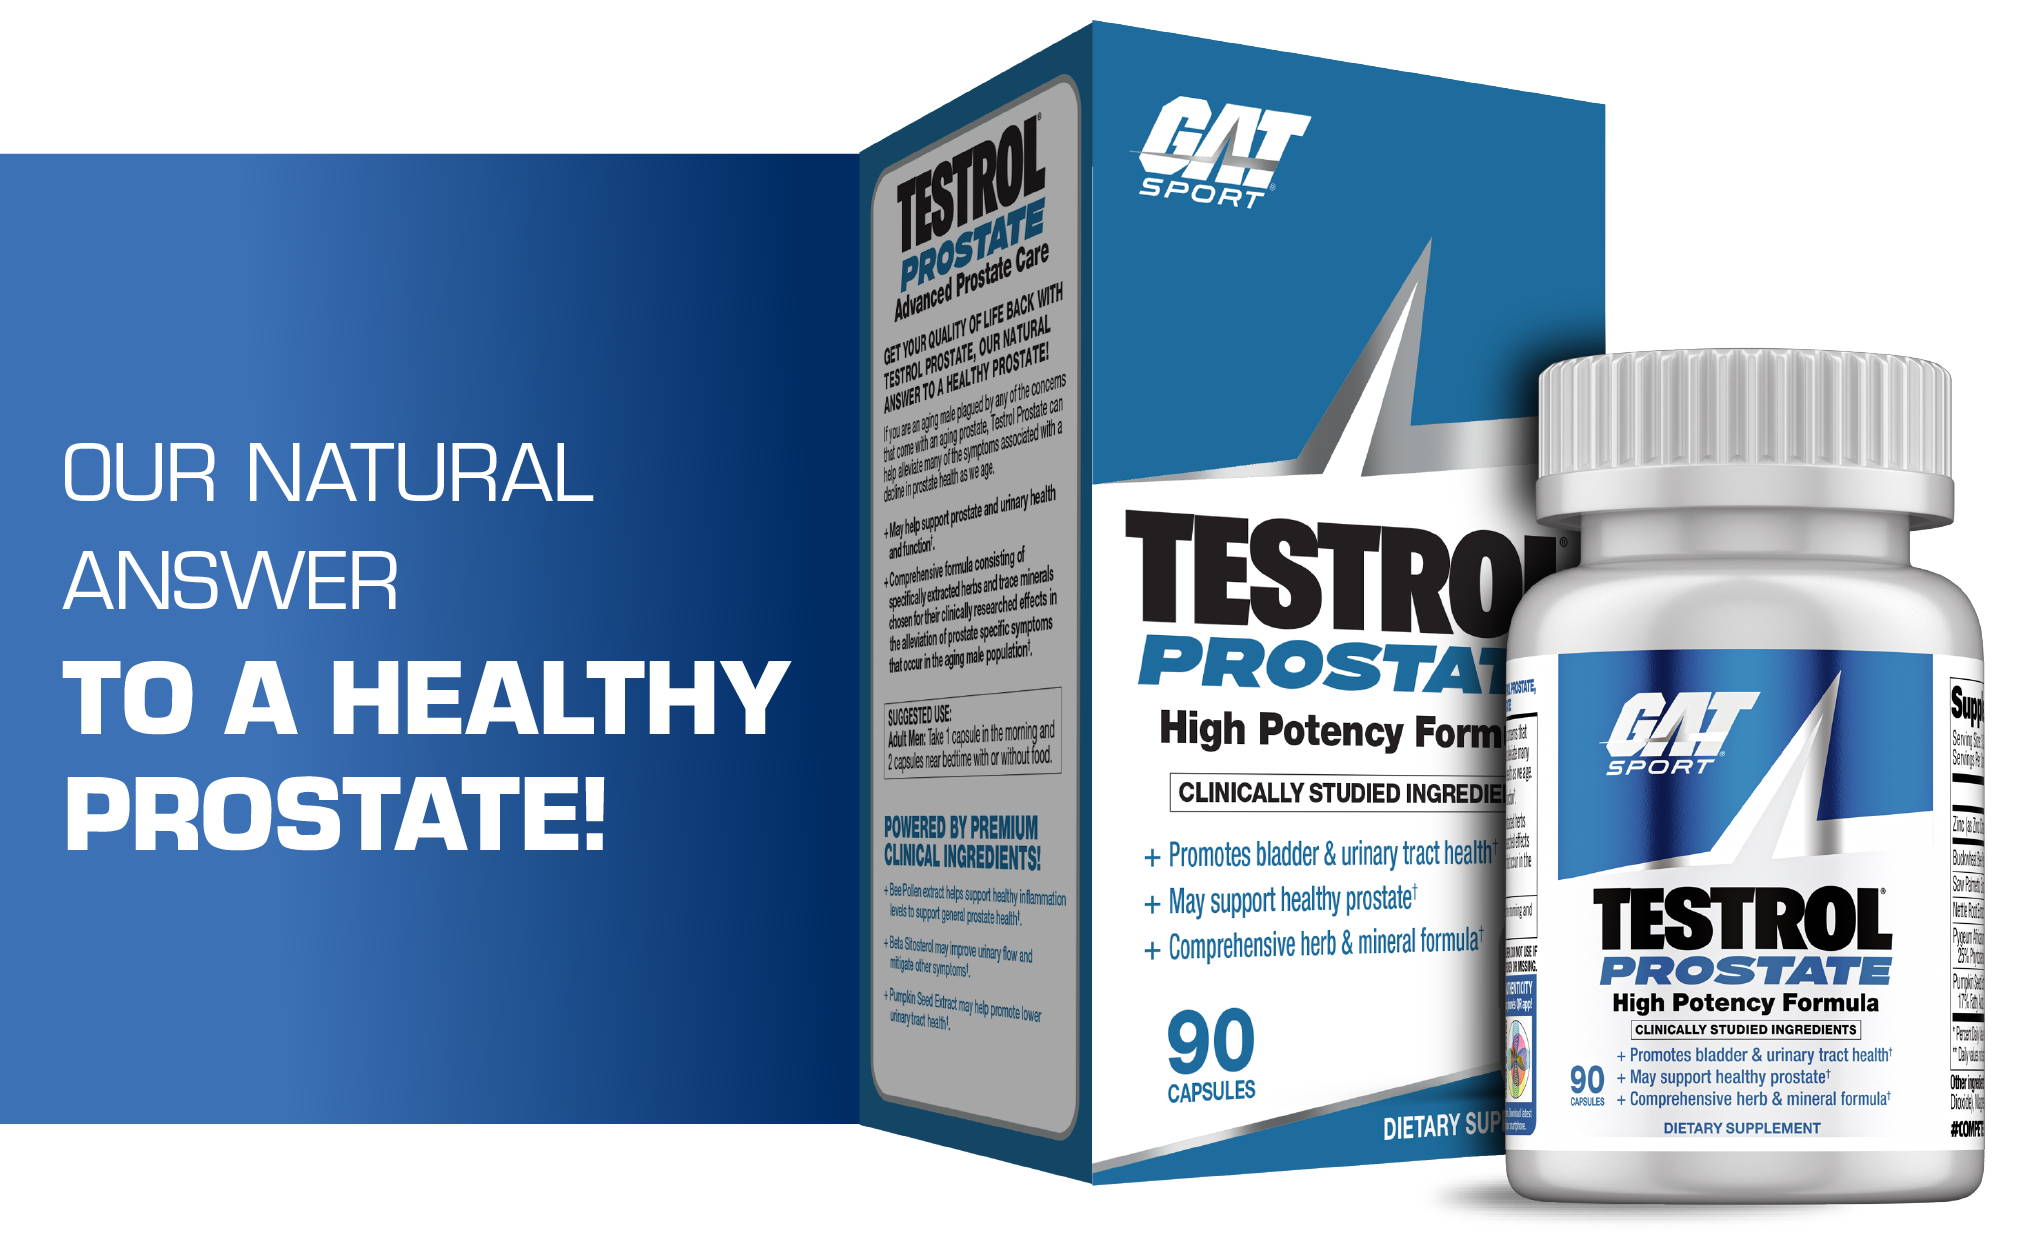 Testrol Prostate, our natural answer to a Health Prostate!